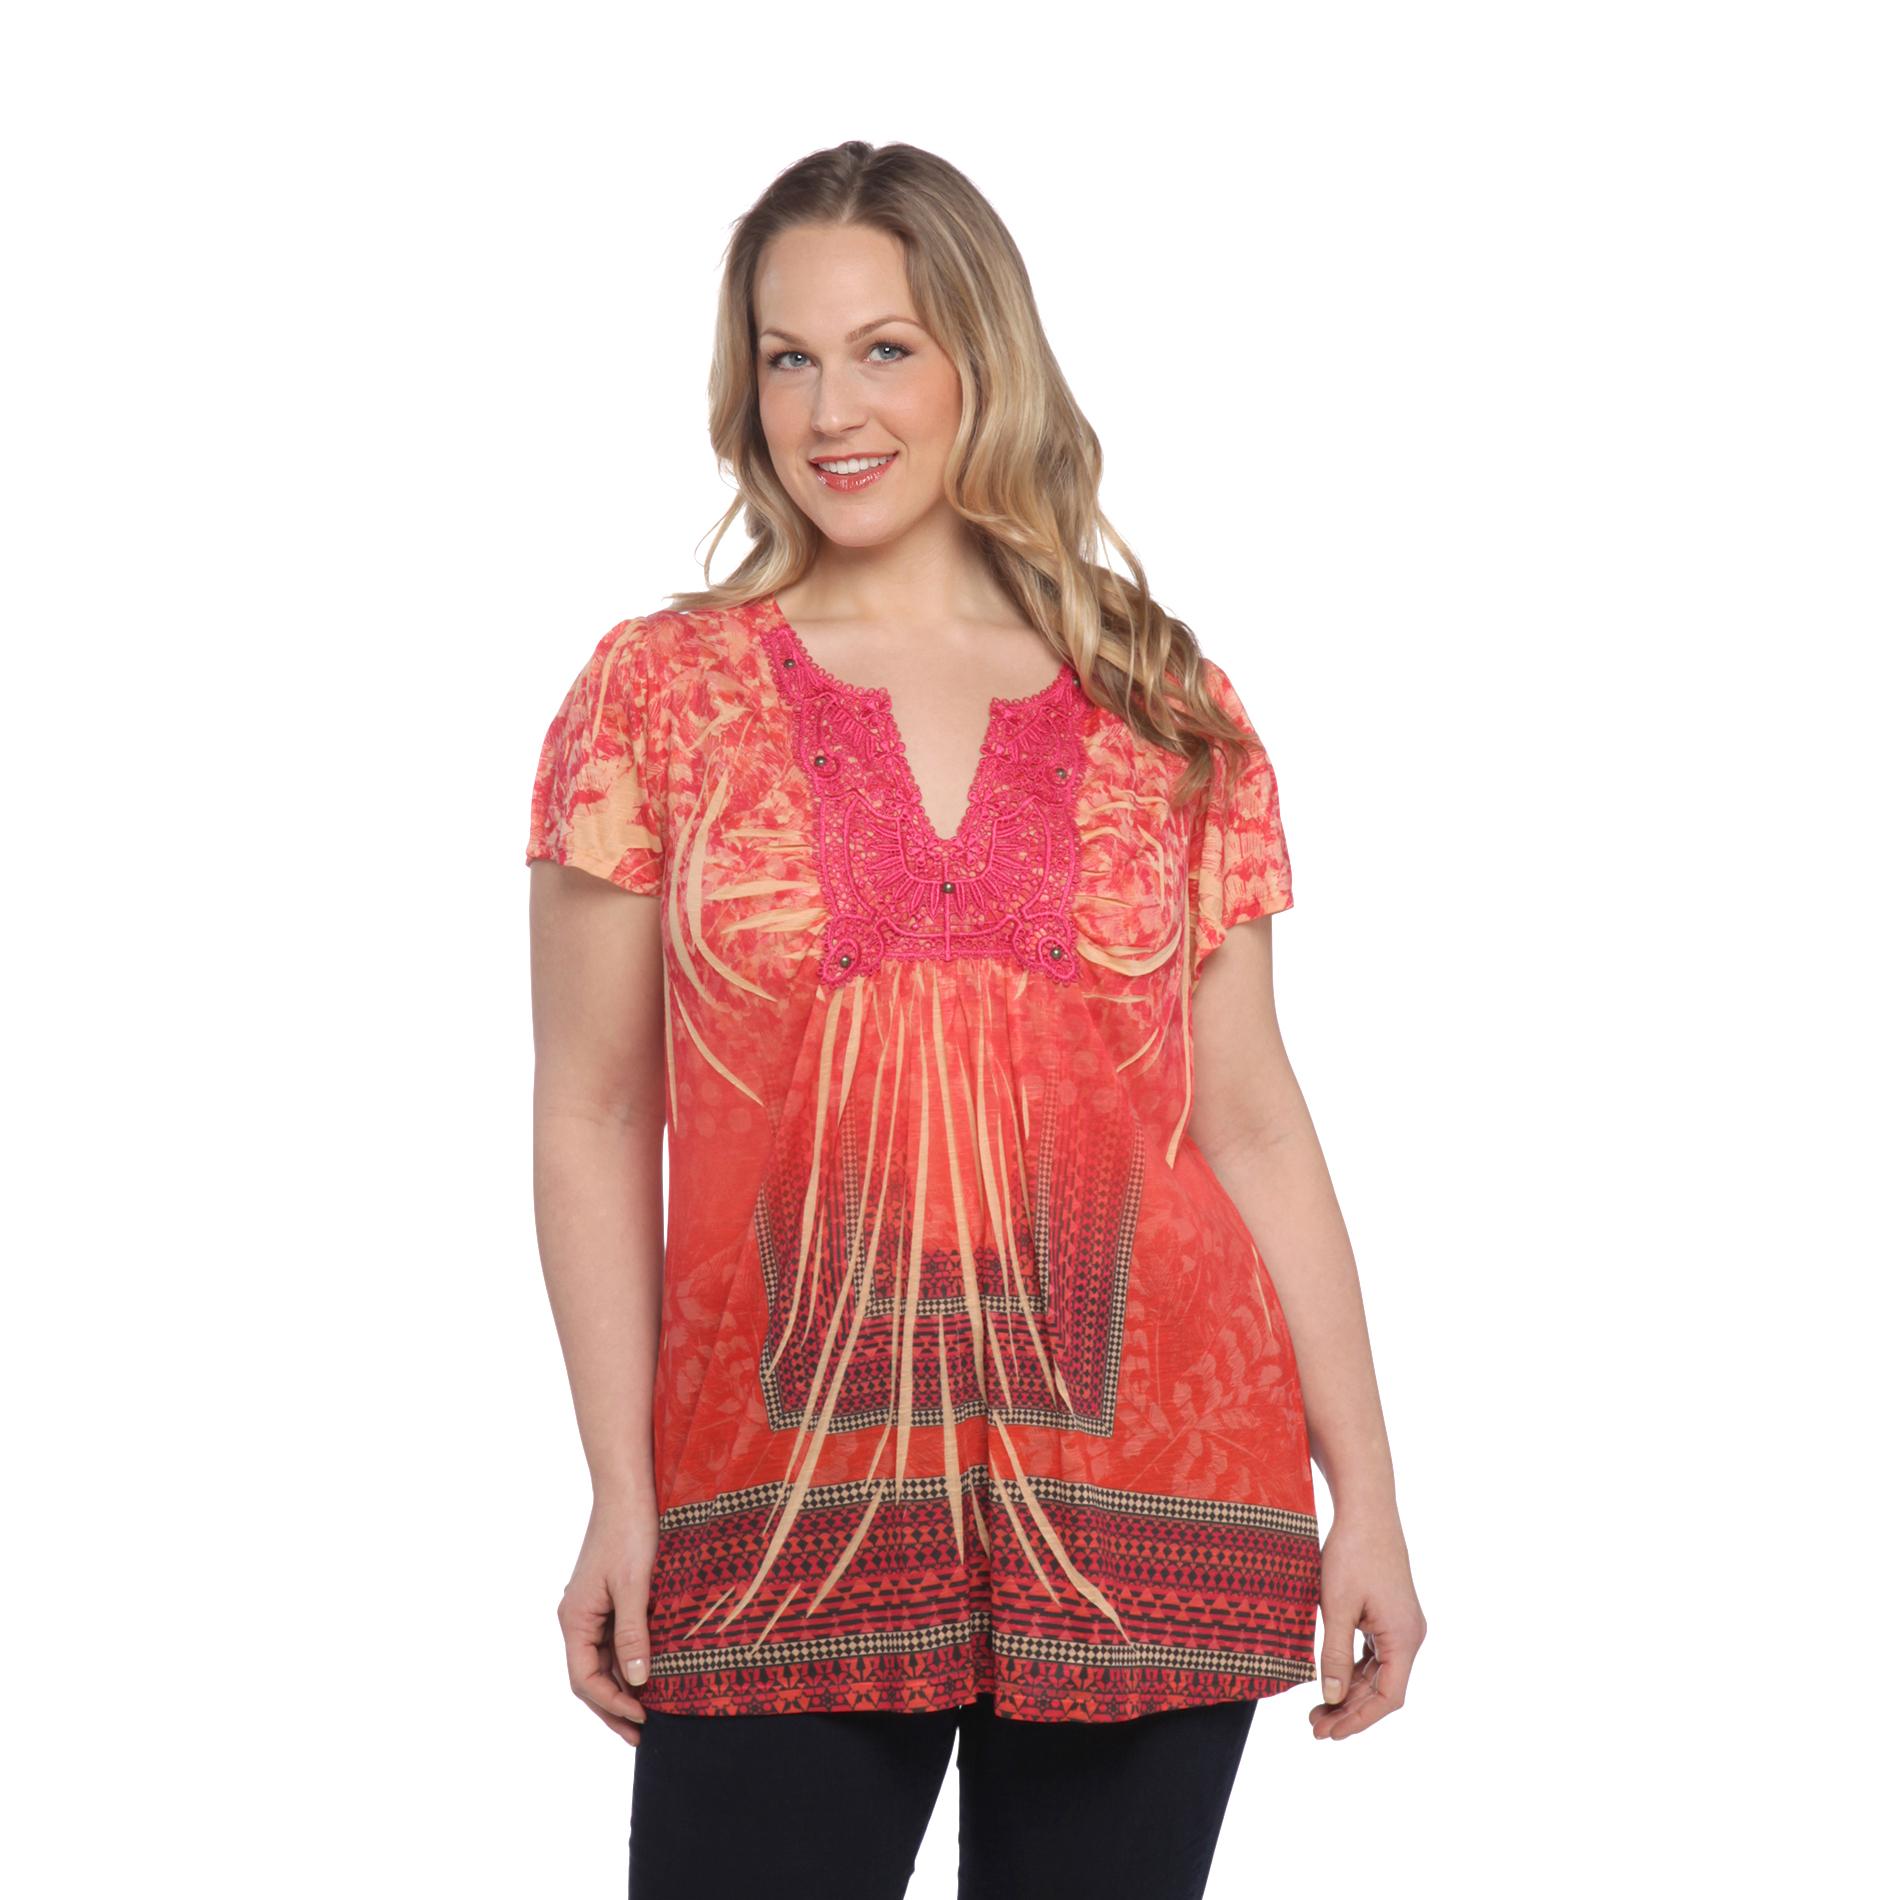 Live and Let Live Women's Plus Lace Embellished Sublimation Top